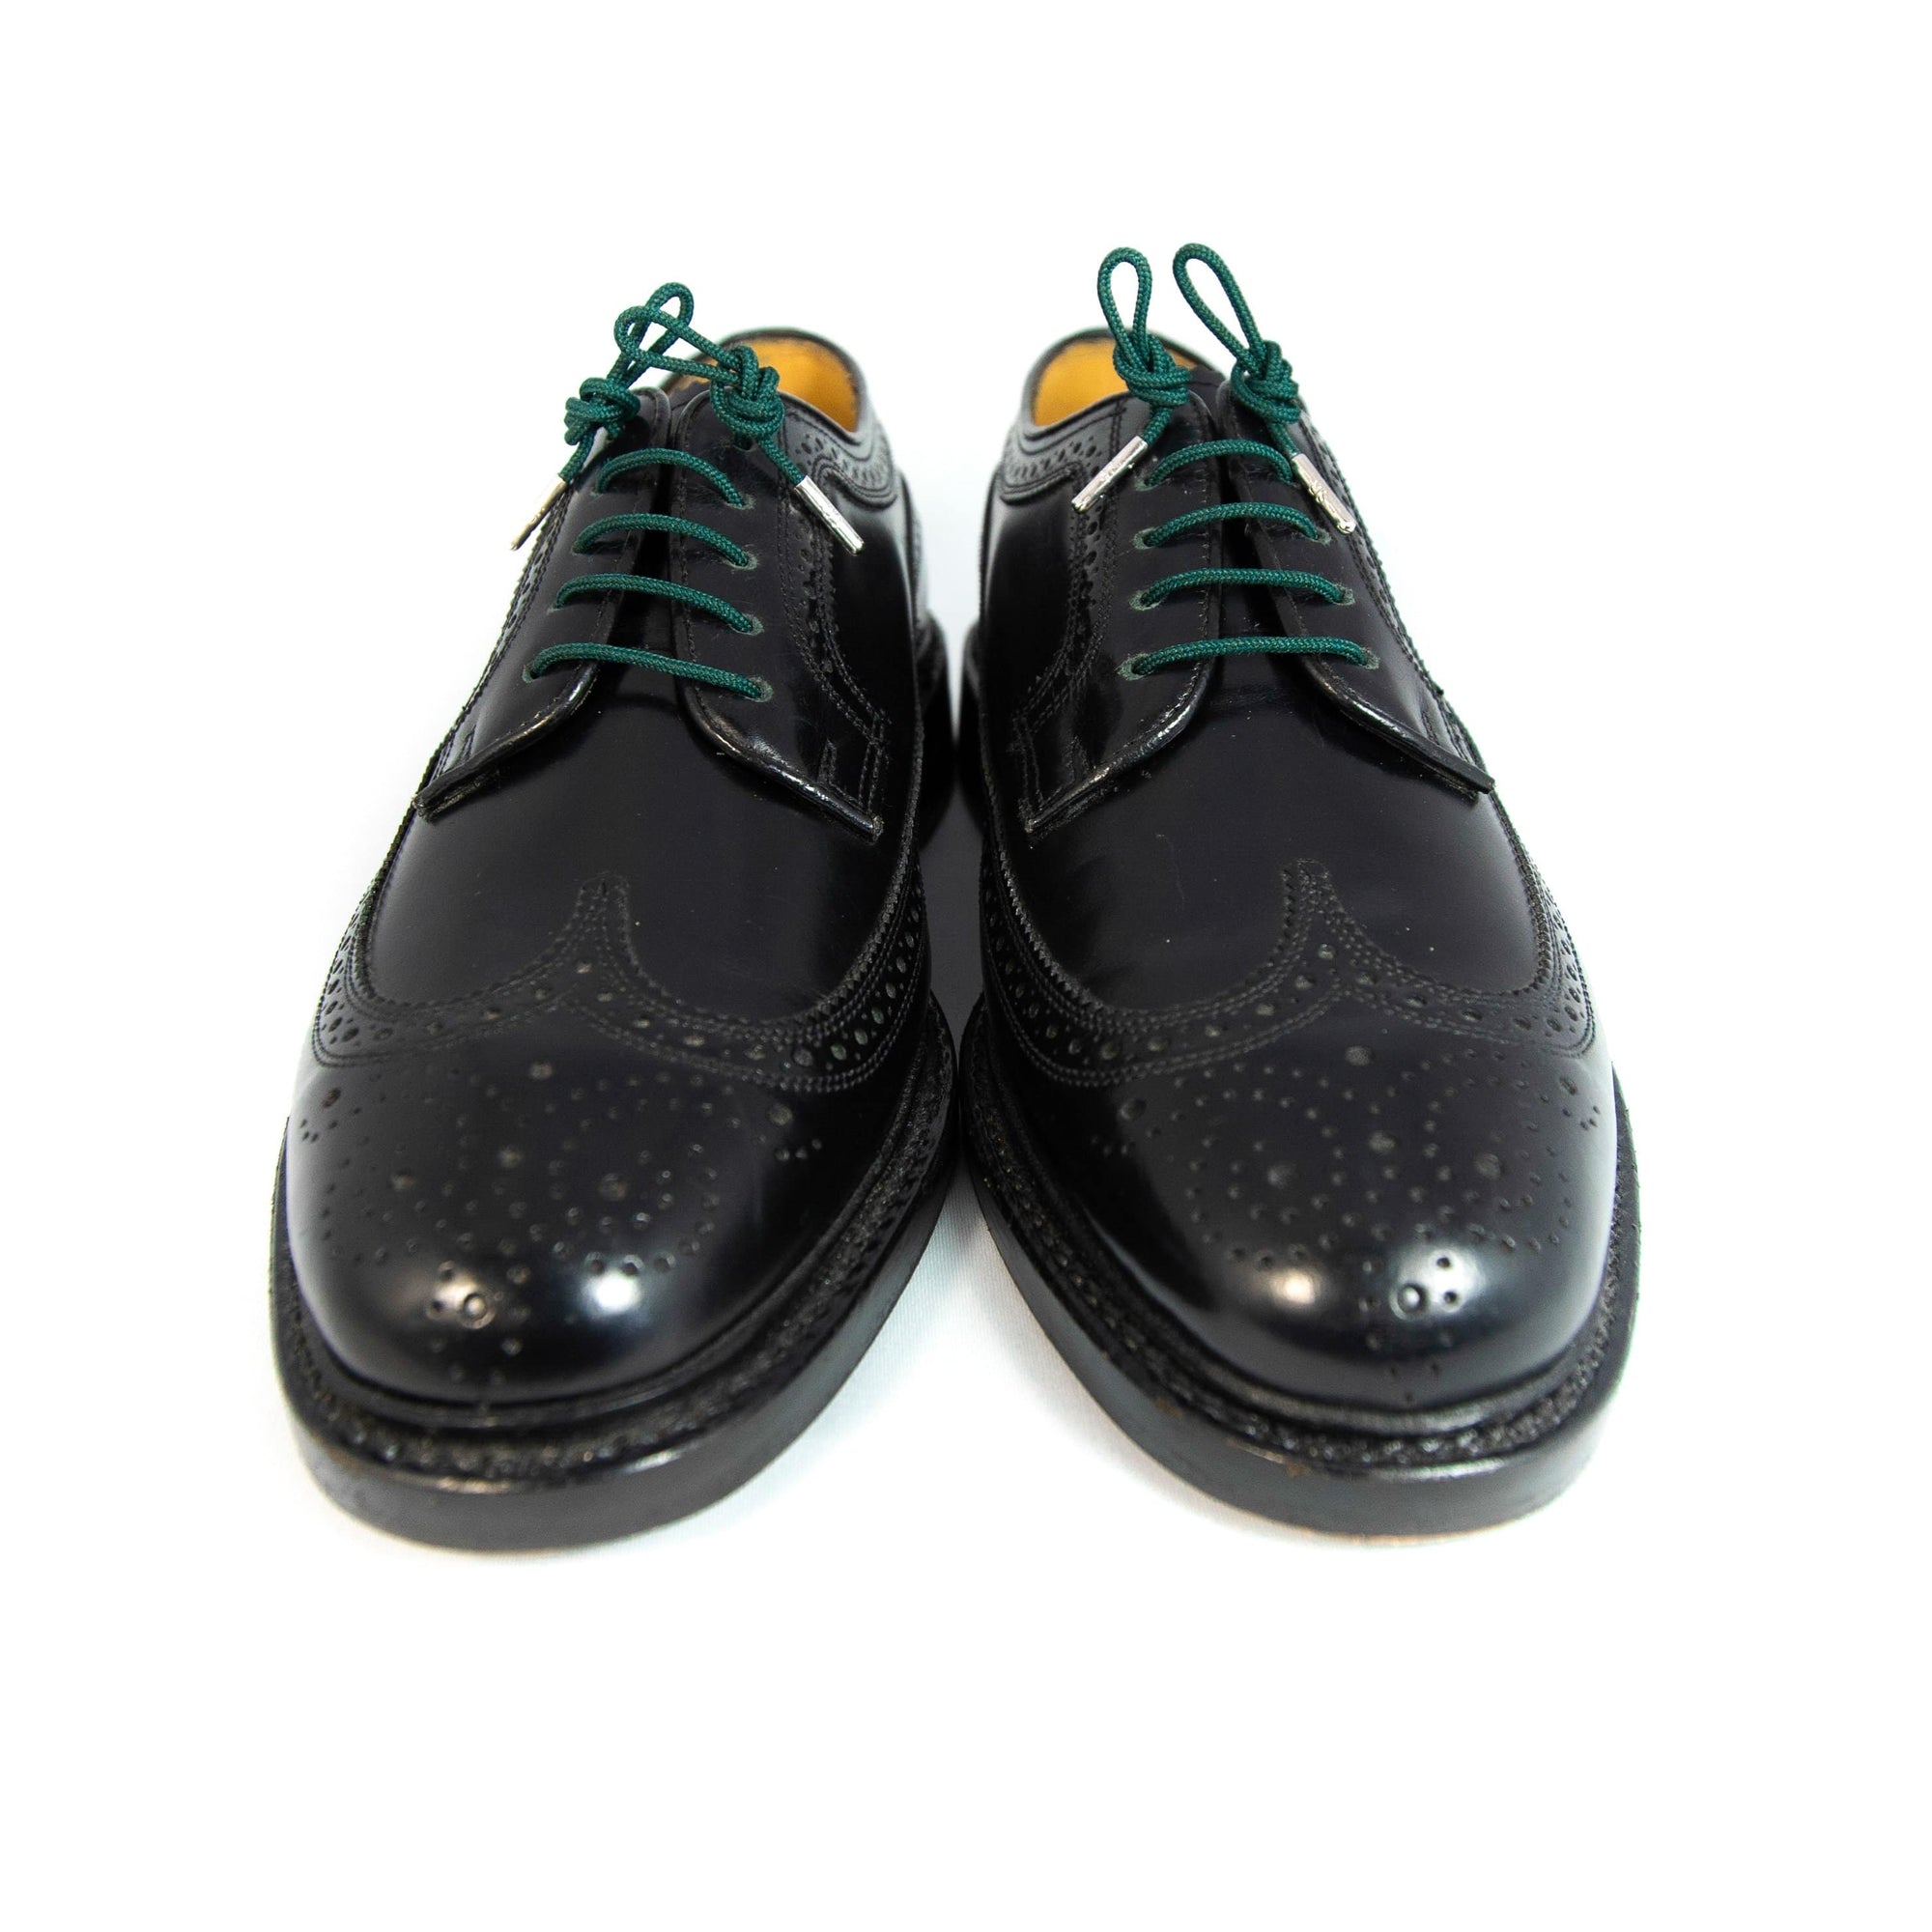 Forest green laces for dress shoes, Length: 32"/81cm-Stolen Riches